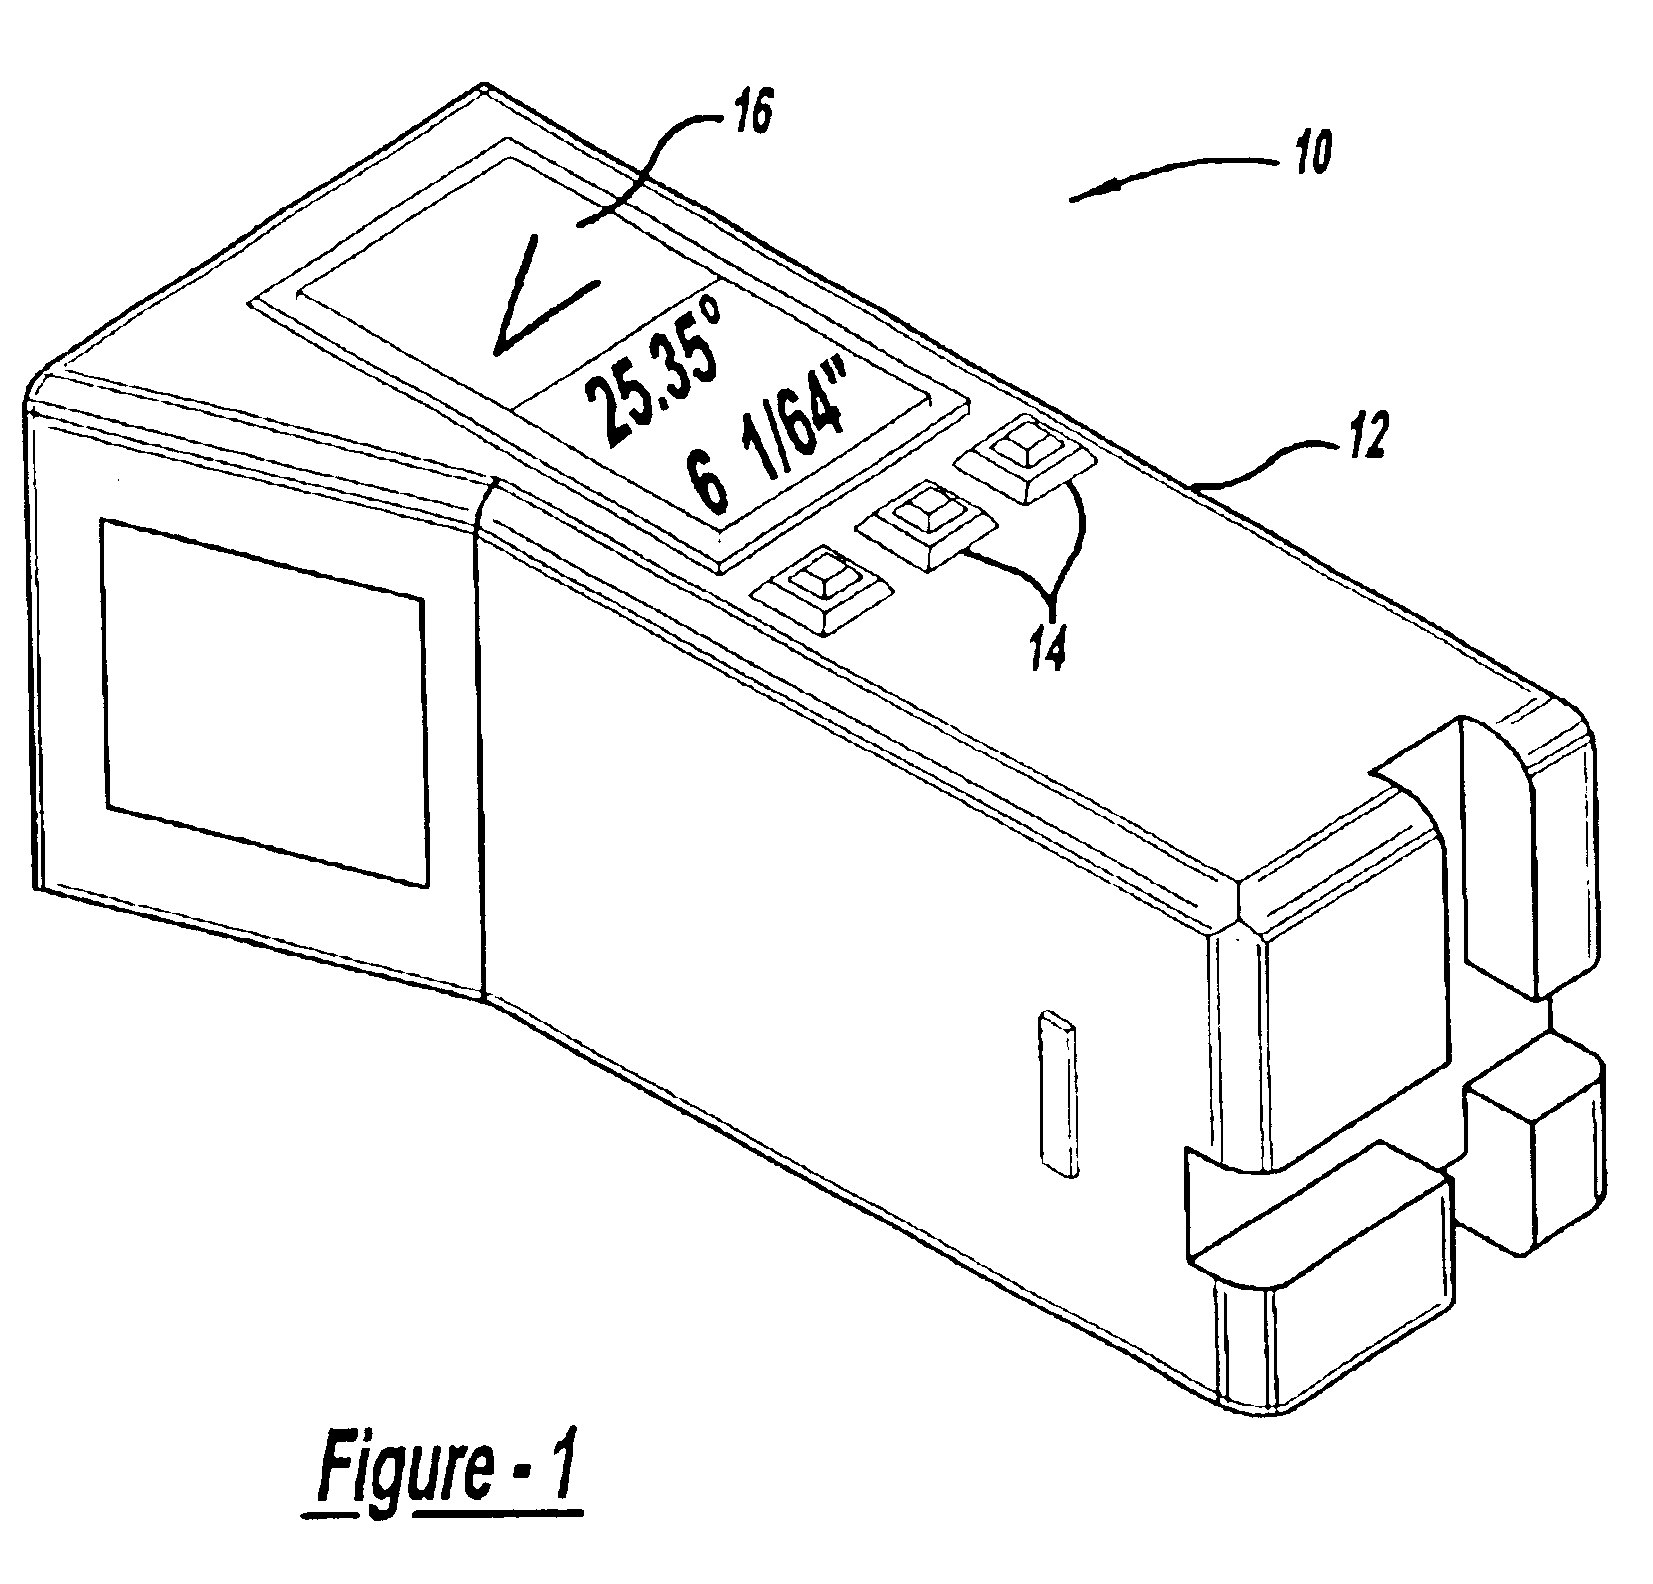 Modular non-contact measurement device for quickly and accurately obtaining dimensional measurement data